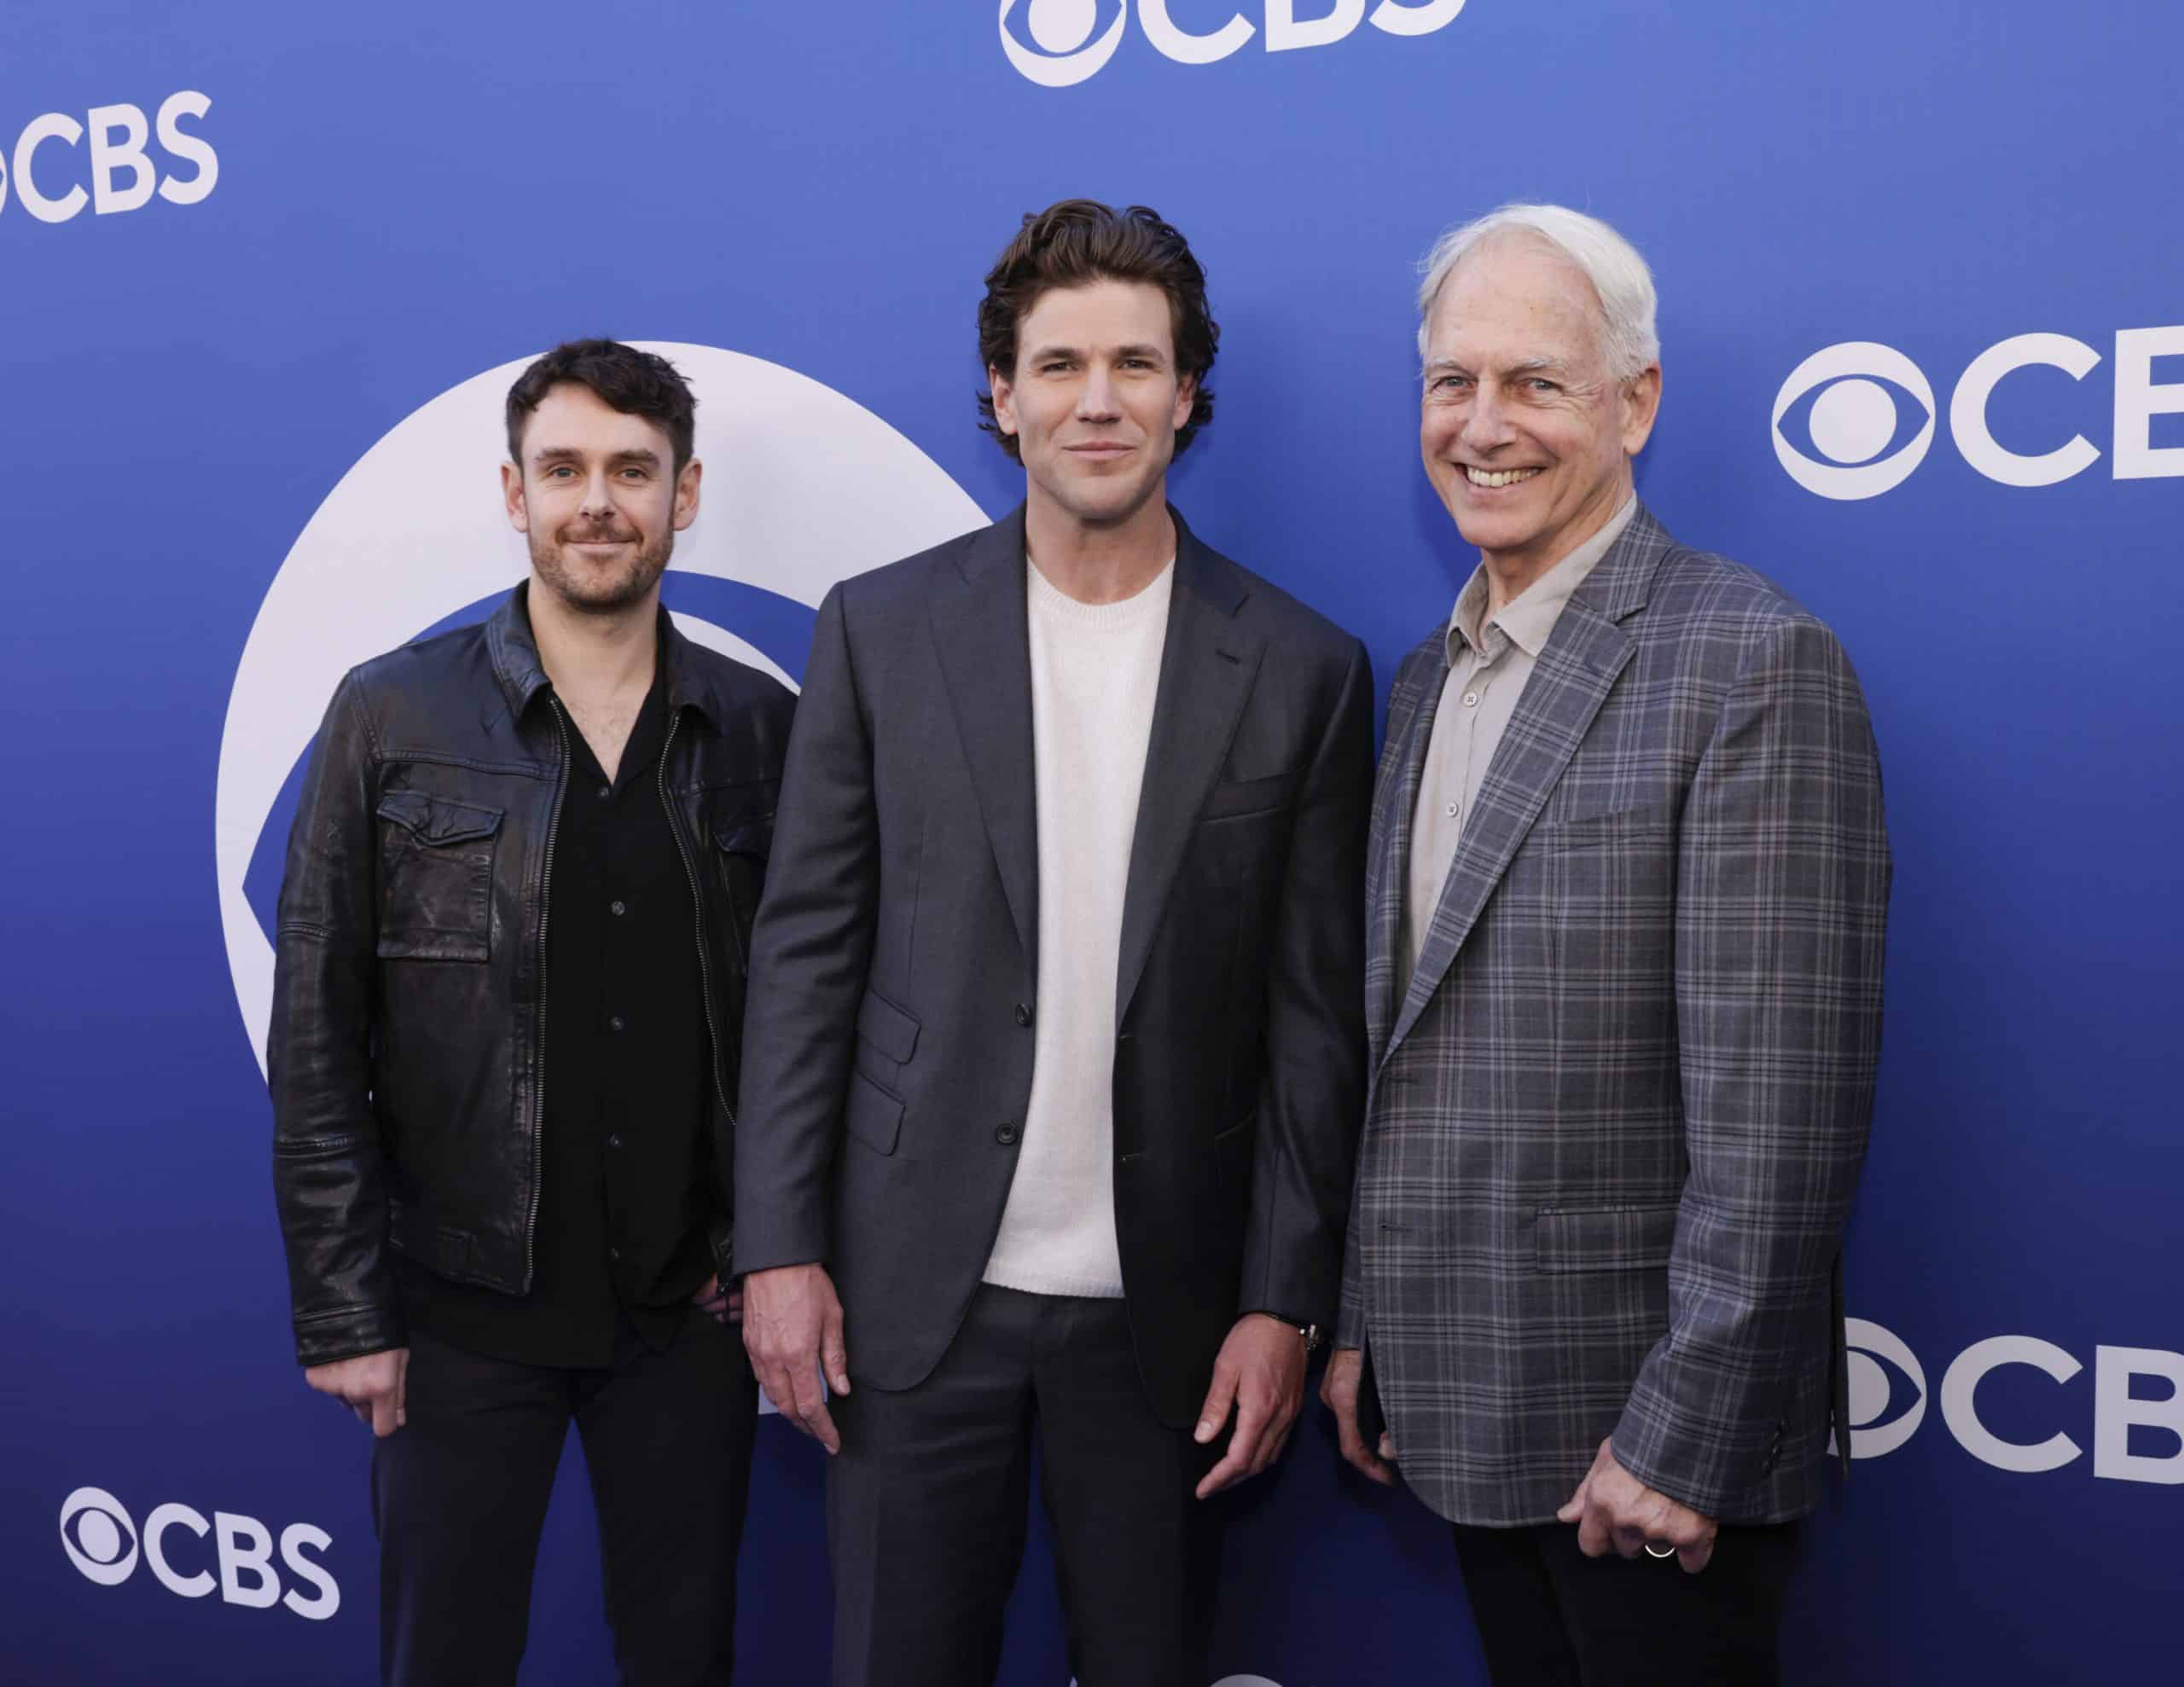 Executive Producer Sean Harmon, Austin Stowell and Executive Producer Mark Harmon from ’NCIS: Origins’ attend the CBS New Fall Schedule Celebration event to announce CBS' 2024-2025 primetime lineup at Paramount Studios in Los Angeles on May 2, 2024. The primetime programming lineup of CBS Originals features three new dramas, two new comedies, a new alternative series, a reimagined classic game show, special event programming and 18 returning series.  -- Photo: Francis Specker/CBS ©2024 CBS Broadcasting, Inc. All Rights Reserved.